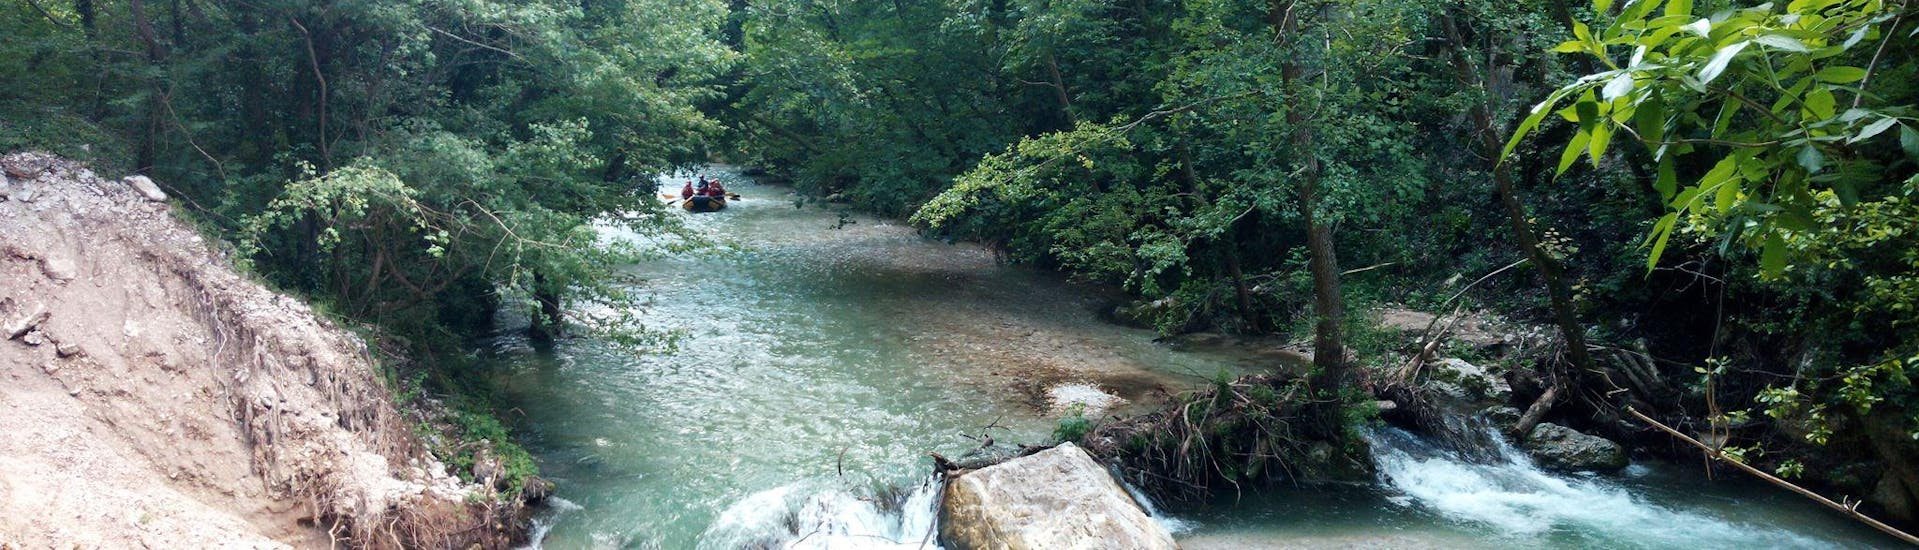 Lively river with a raft boat in the distance during the Classic Rafting on the River Corno with Rafting Nomad Vallo di Nera.